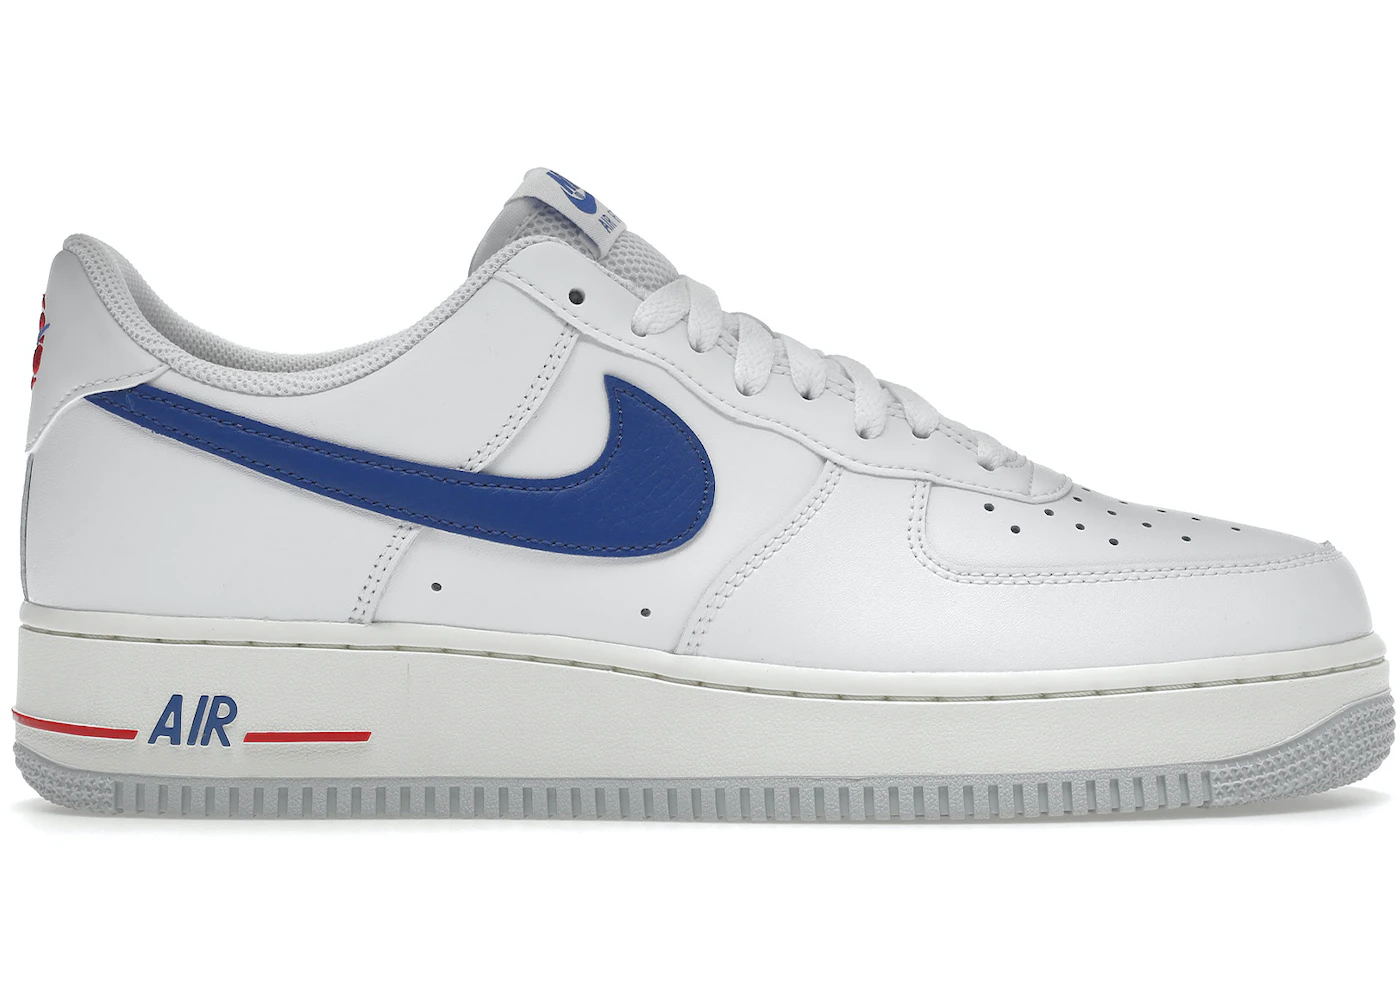 Gladys Calm Repel Nike Air Force 1 Low '07 USA Basketball - DX2660-100 - US